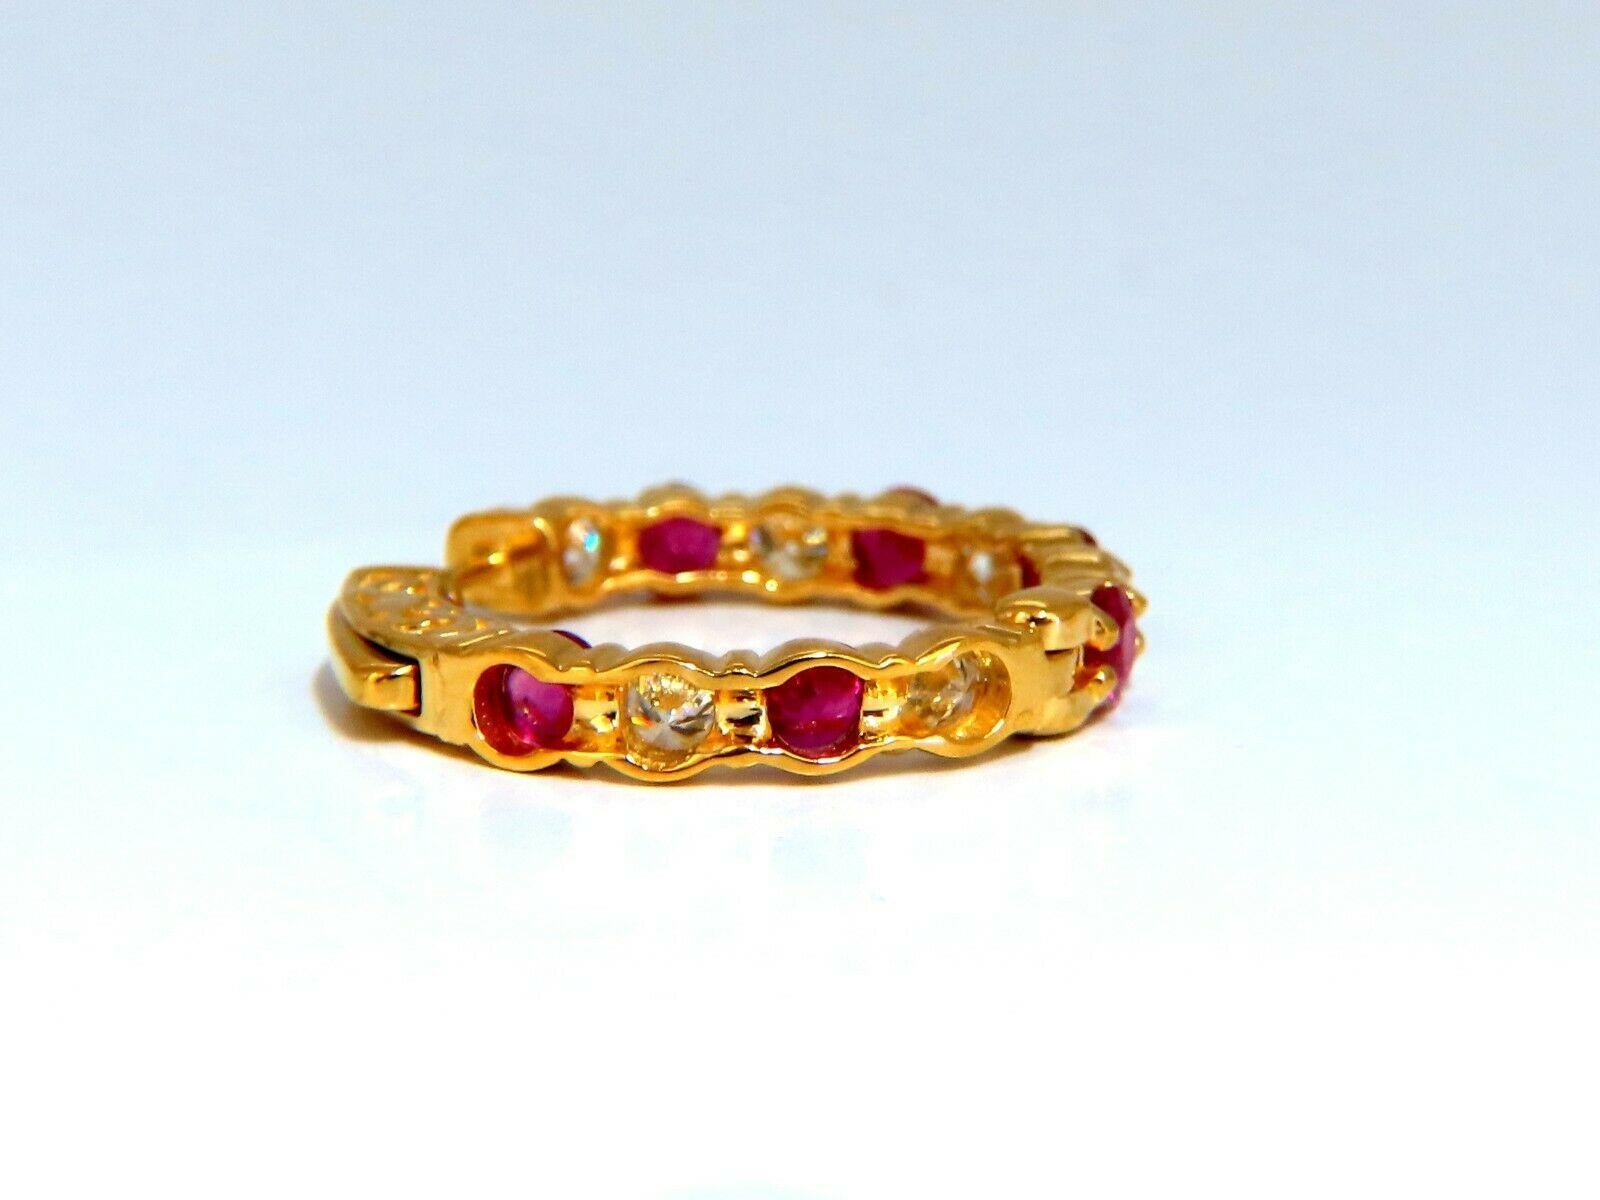 4.14ct Natural Ruby Diamonds Hoop Earrings 14kt Yellow Gold Inside Out In New Condition For Sale In New York, NY